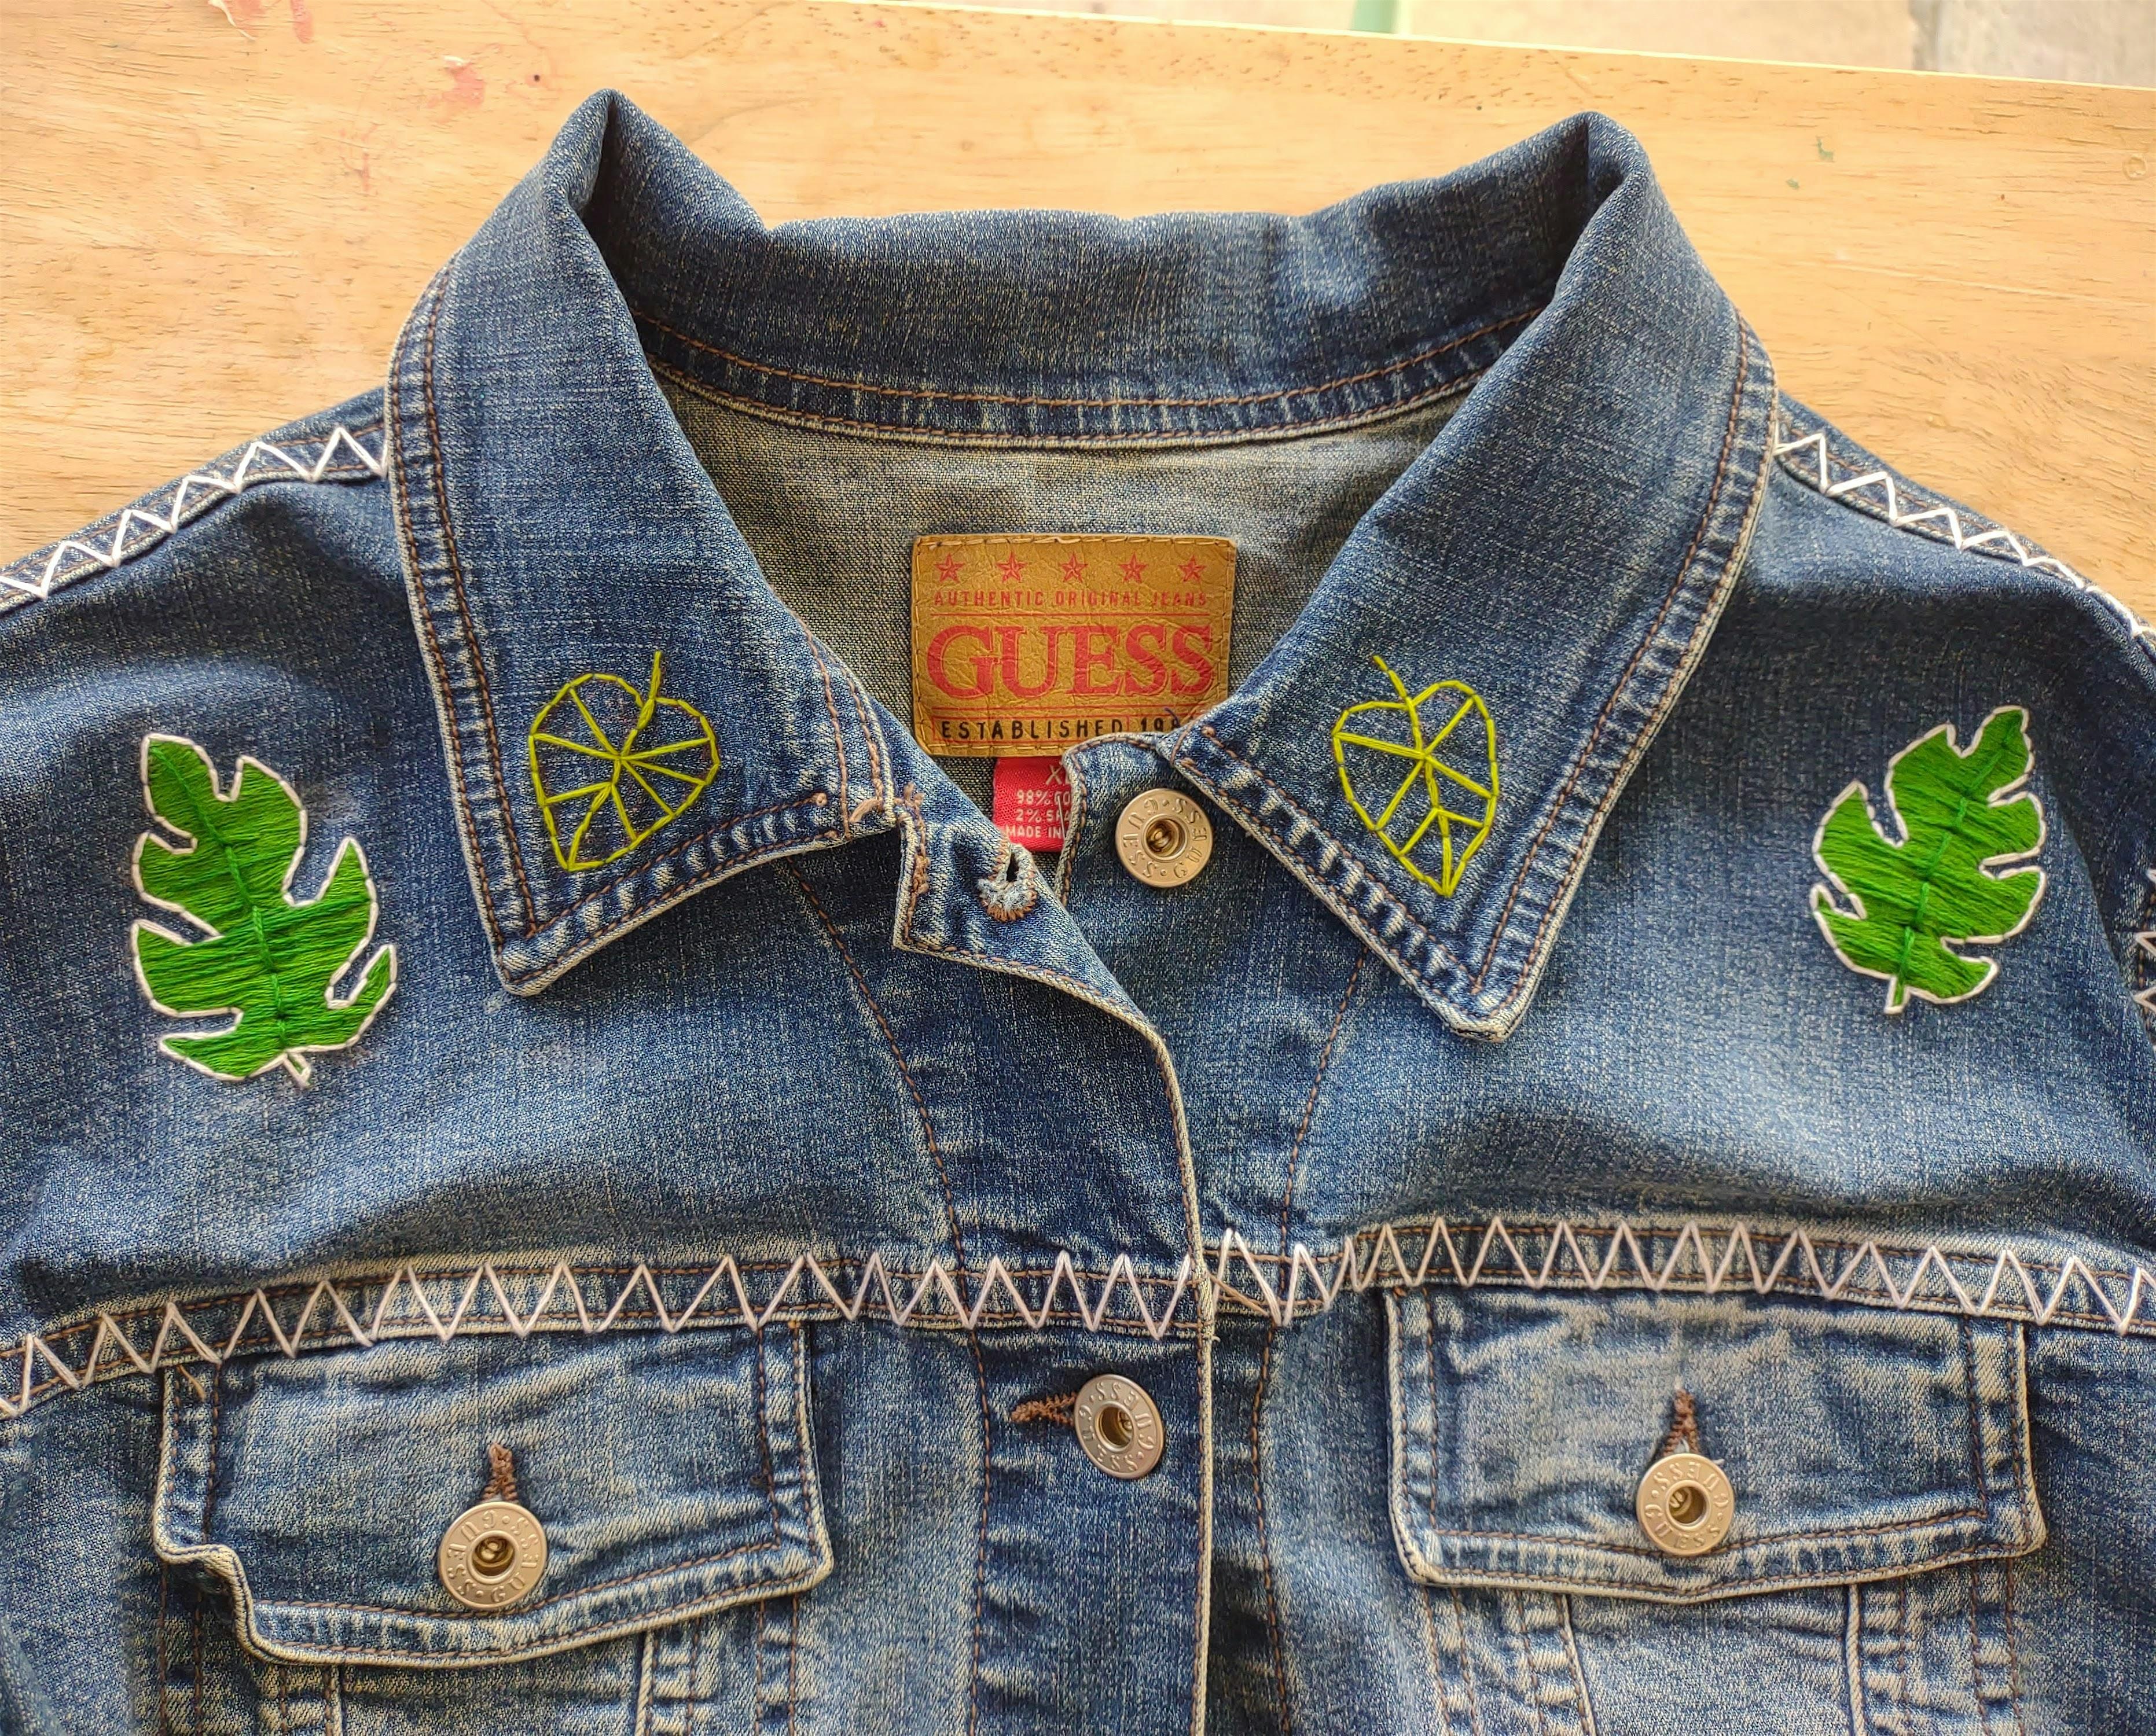 Upcycling Hand Embroidery Workshop for Plant Lovers